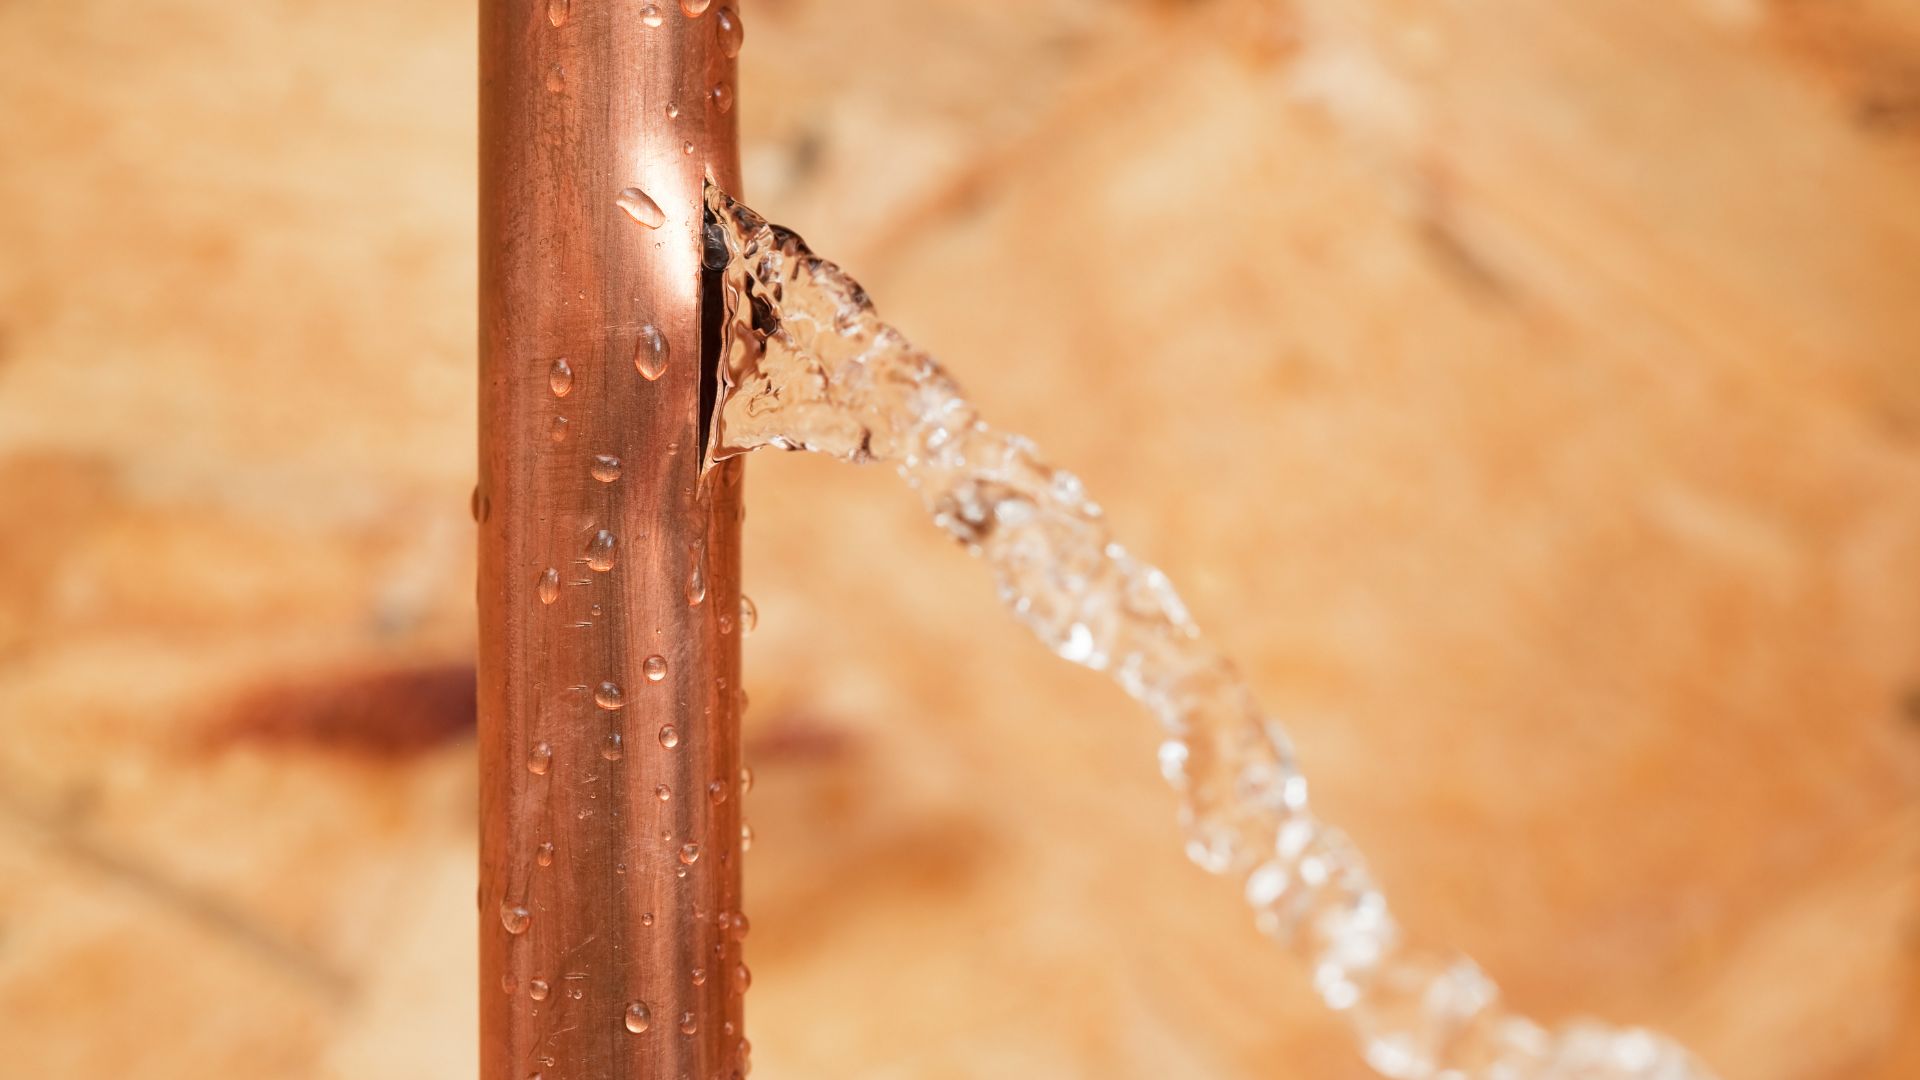 Learn about the most effective ways to fix a leaking pipe with Cornel's Plumbing. Contact us today for expert plumbing services!